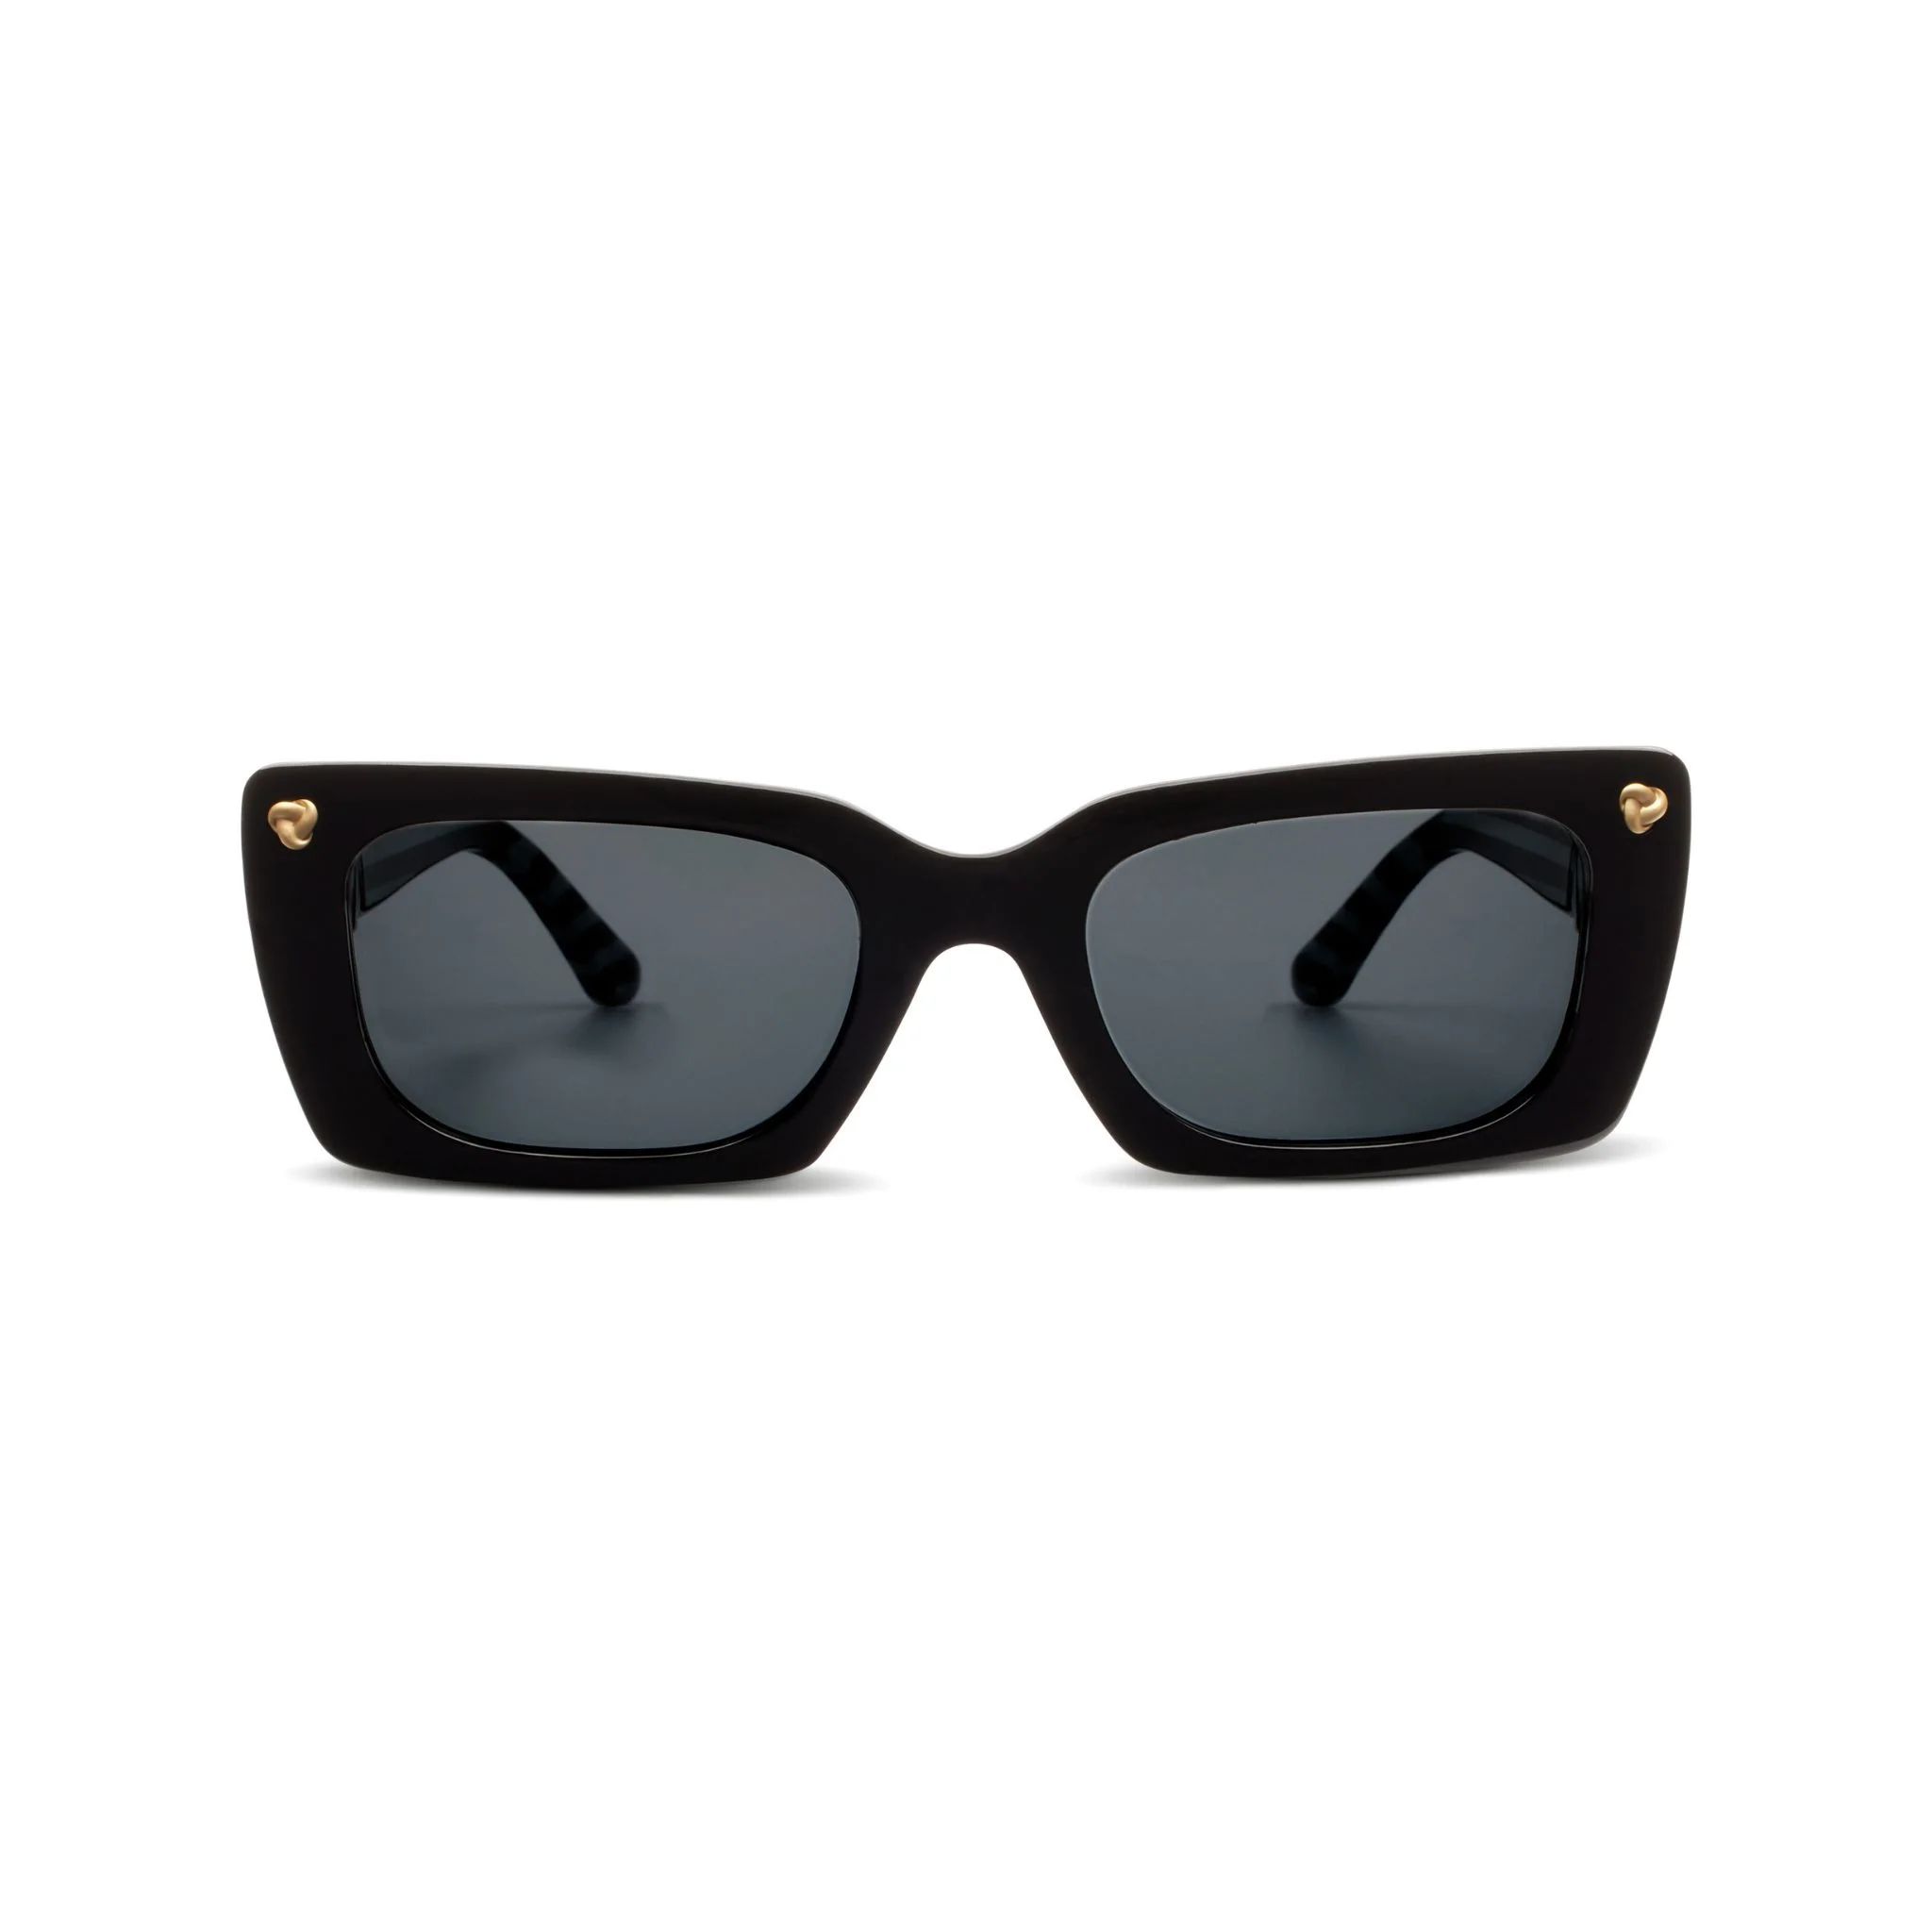 Skipper - Black / No Correction / None - Peepers by PeeperSpecs | Peepers